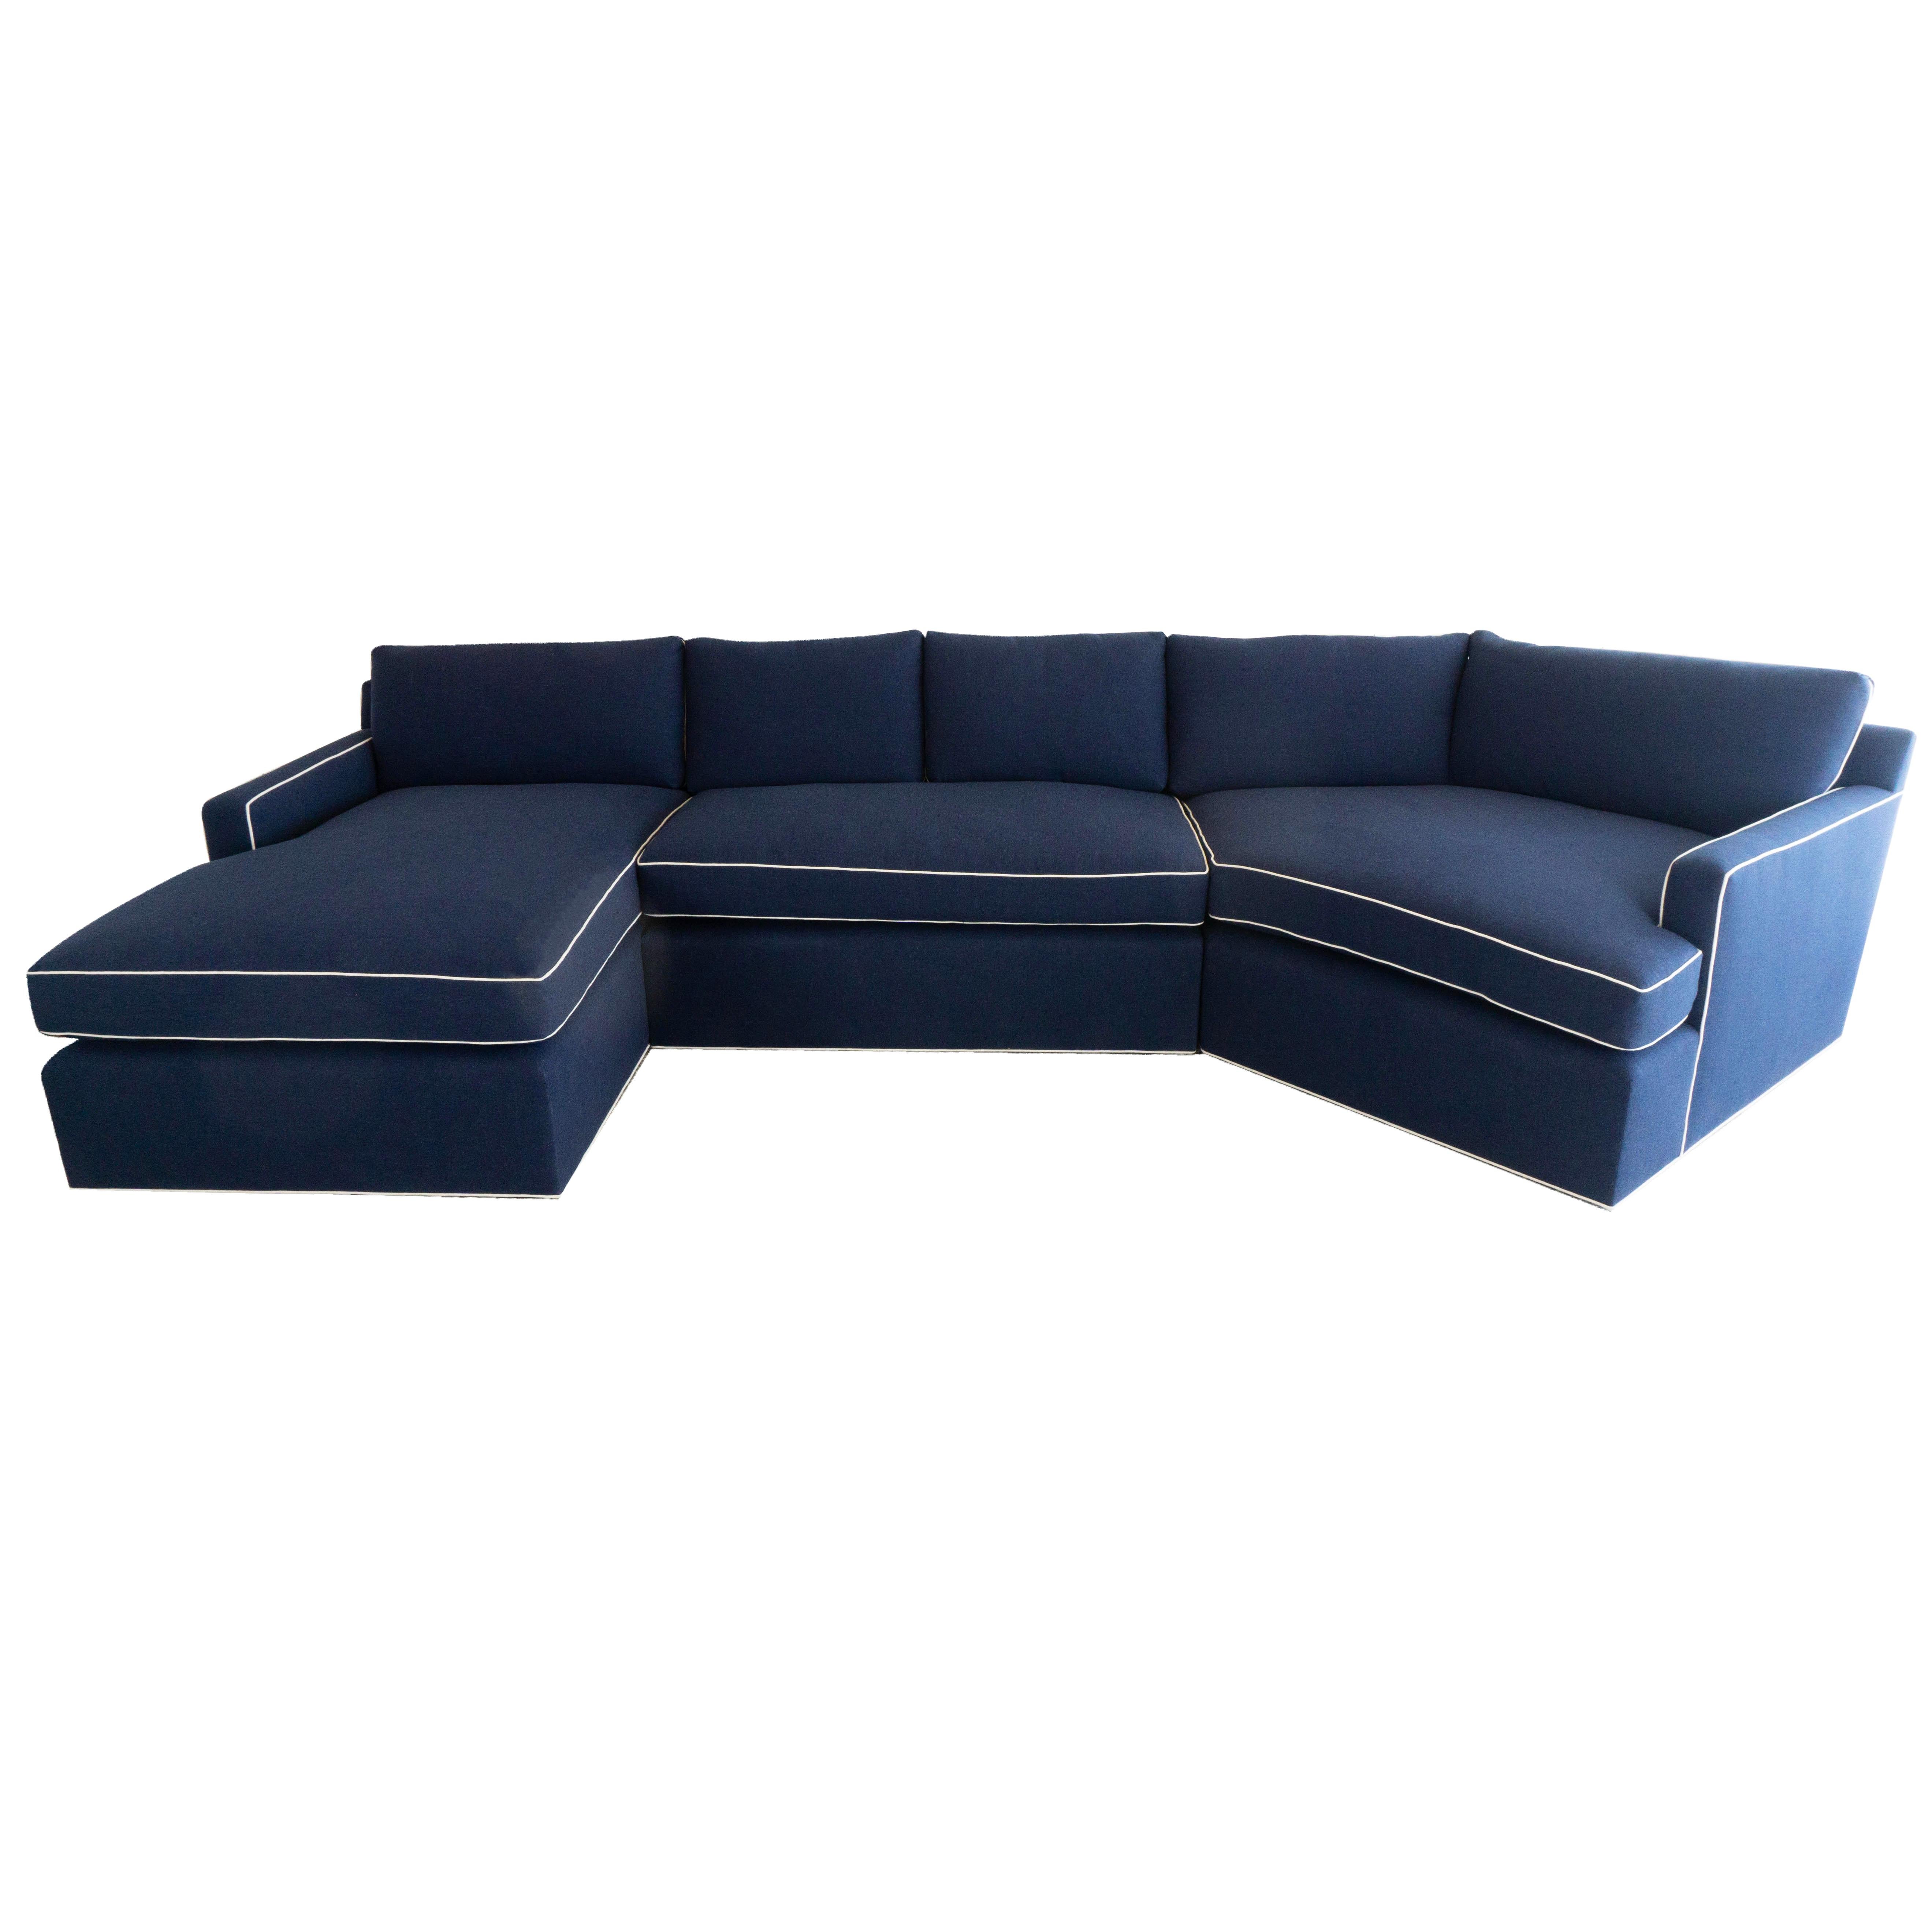 Large Custom Sectional Sofa with Chaise Lounge For Sale